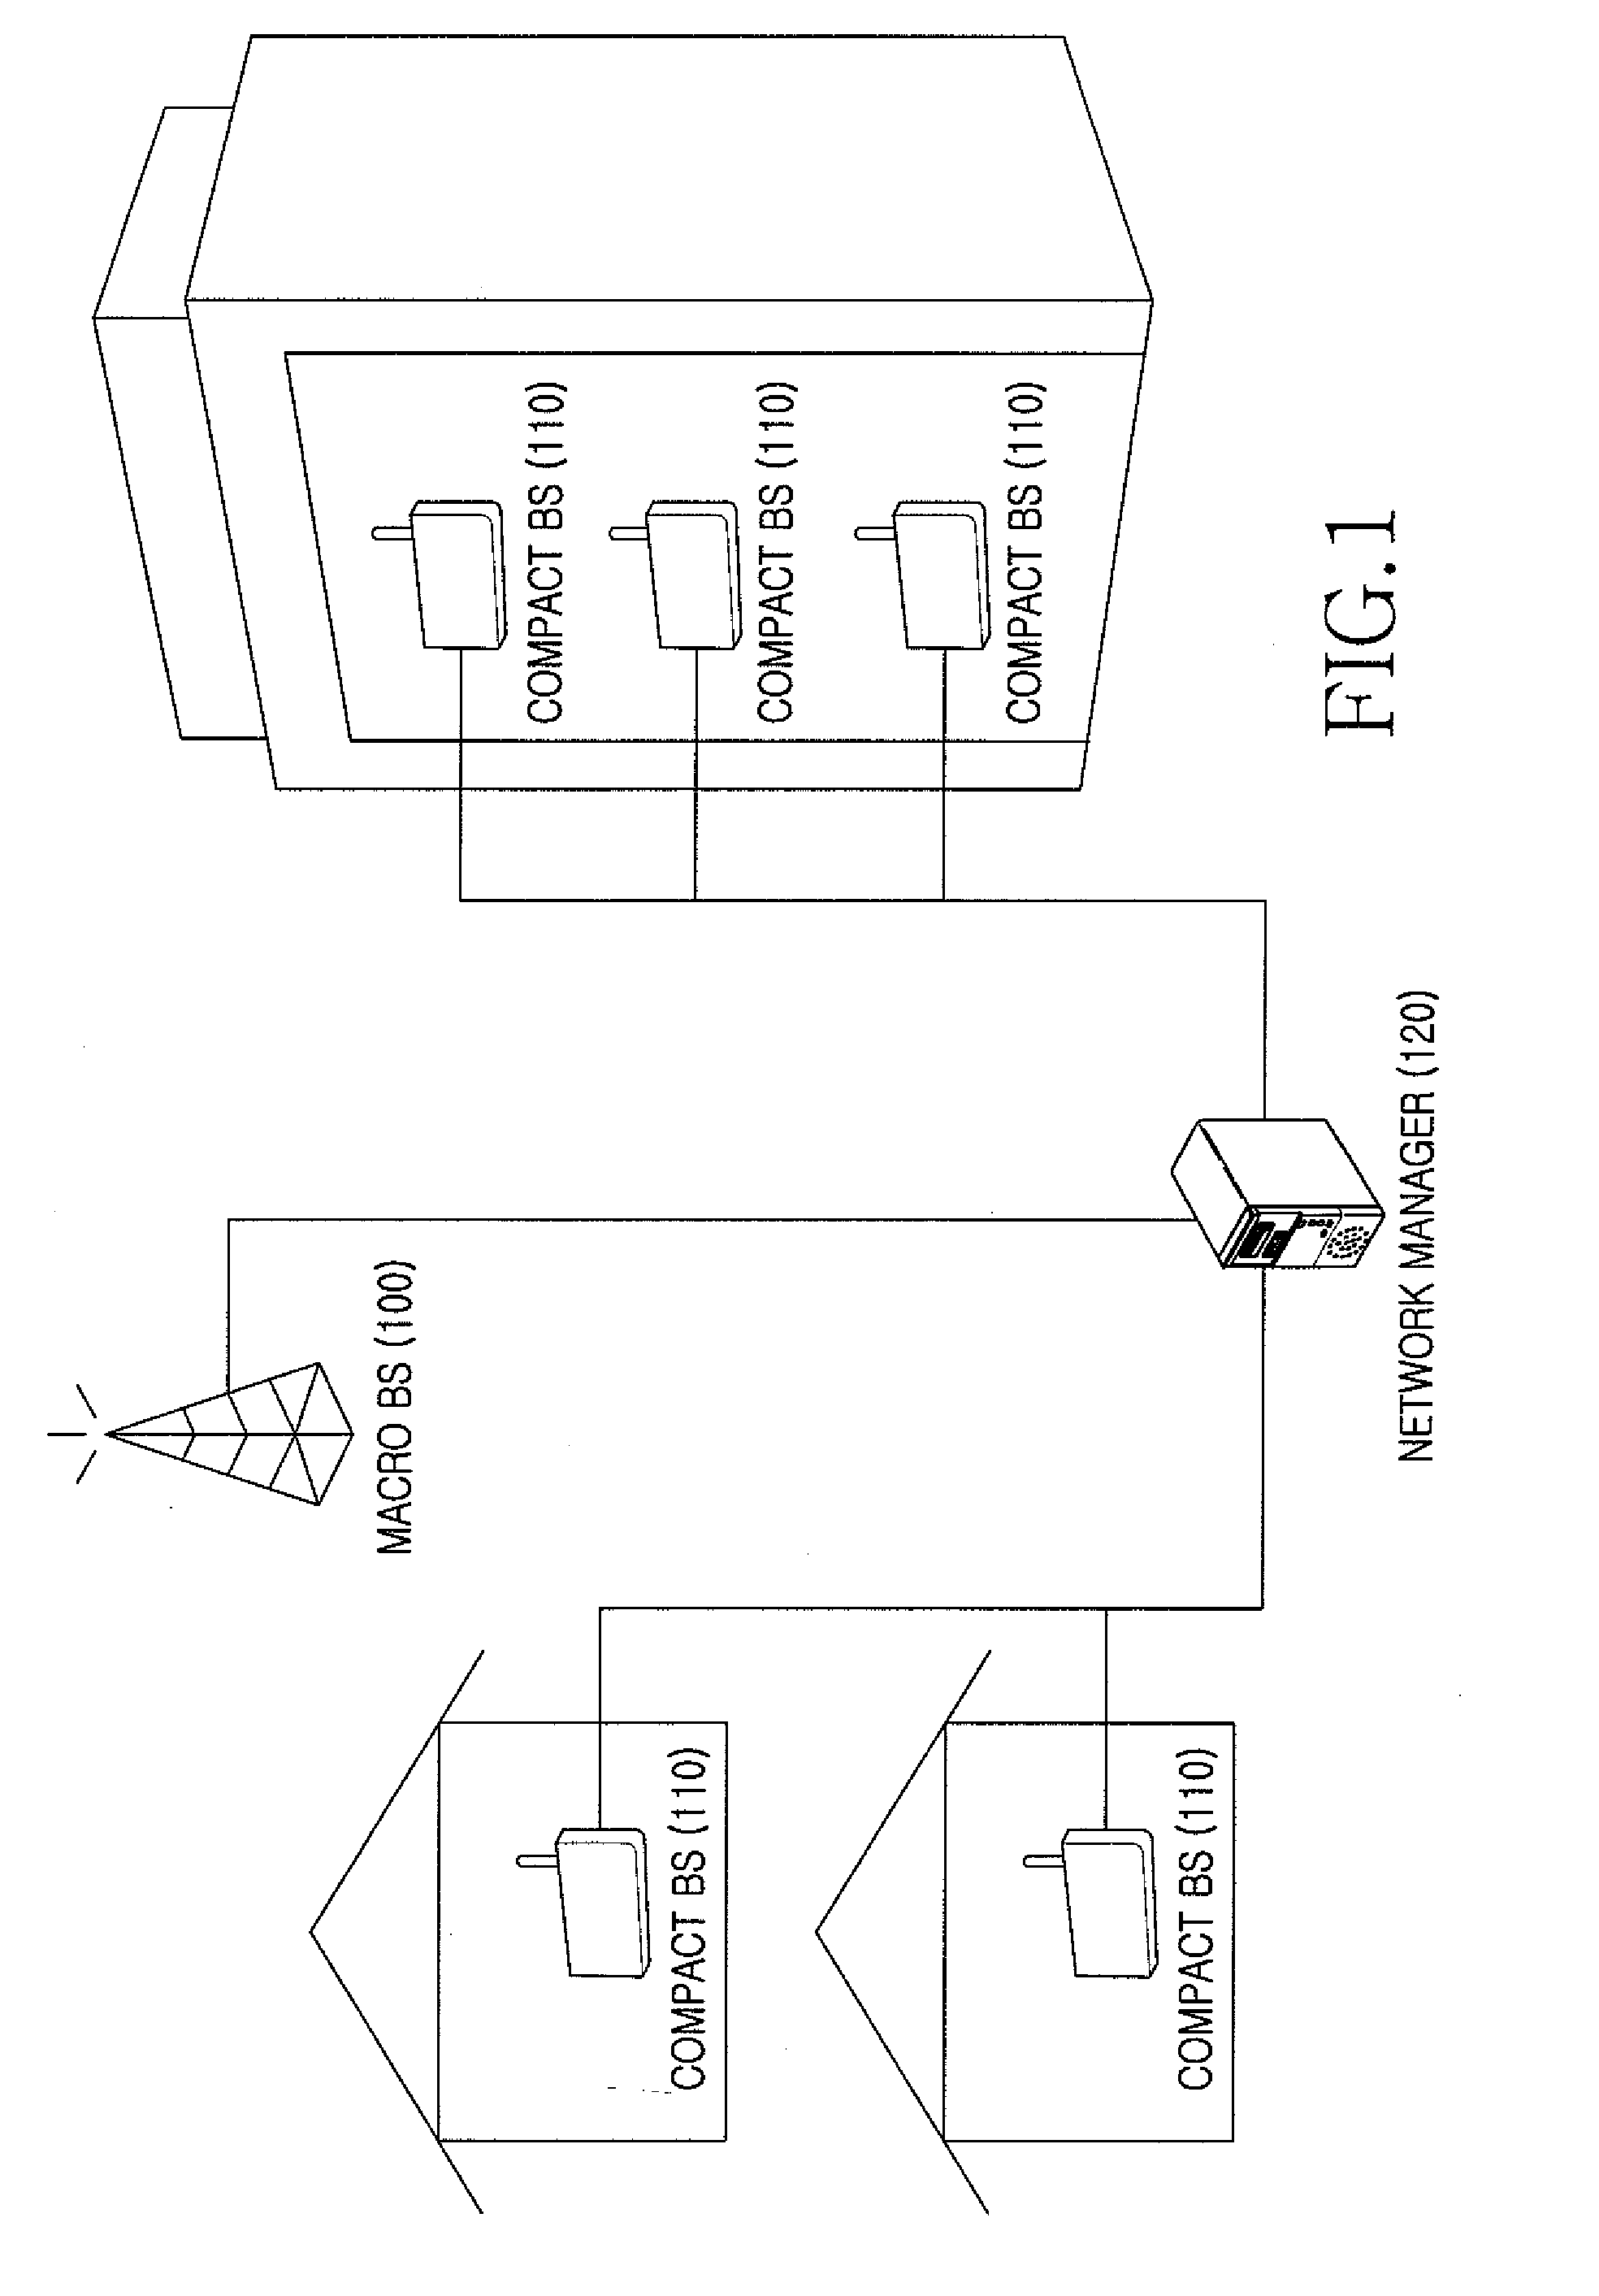 Apparatus and method for setting transmit power of a compact base station in a wireless communication system